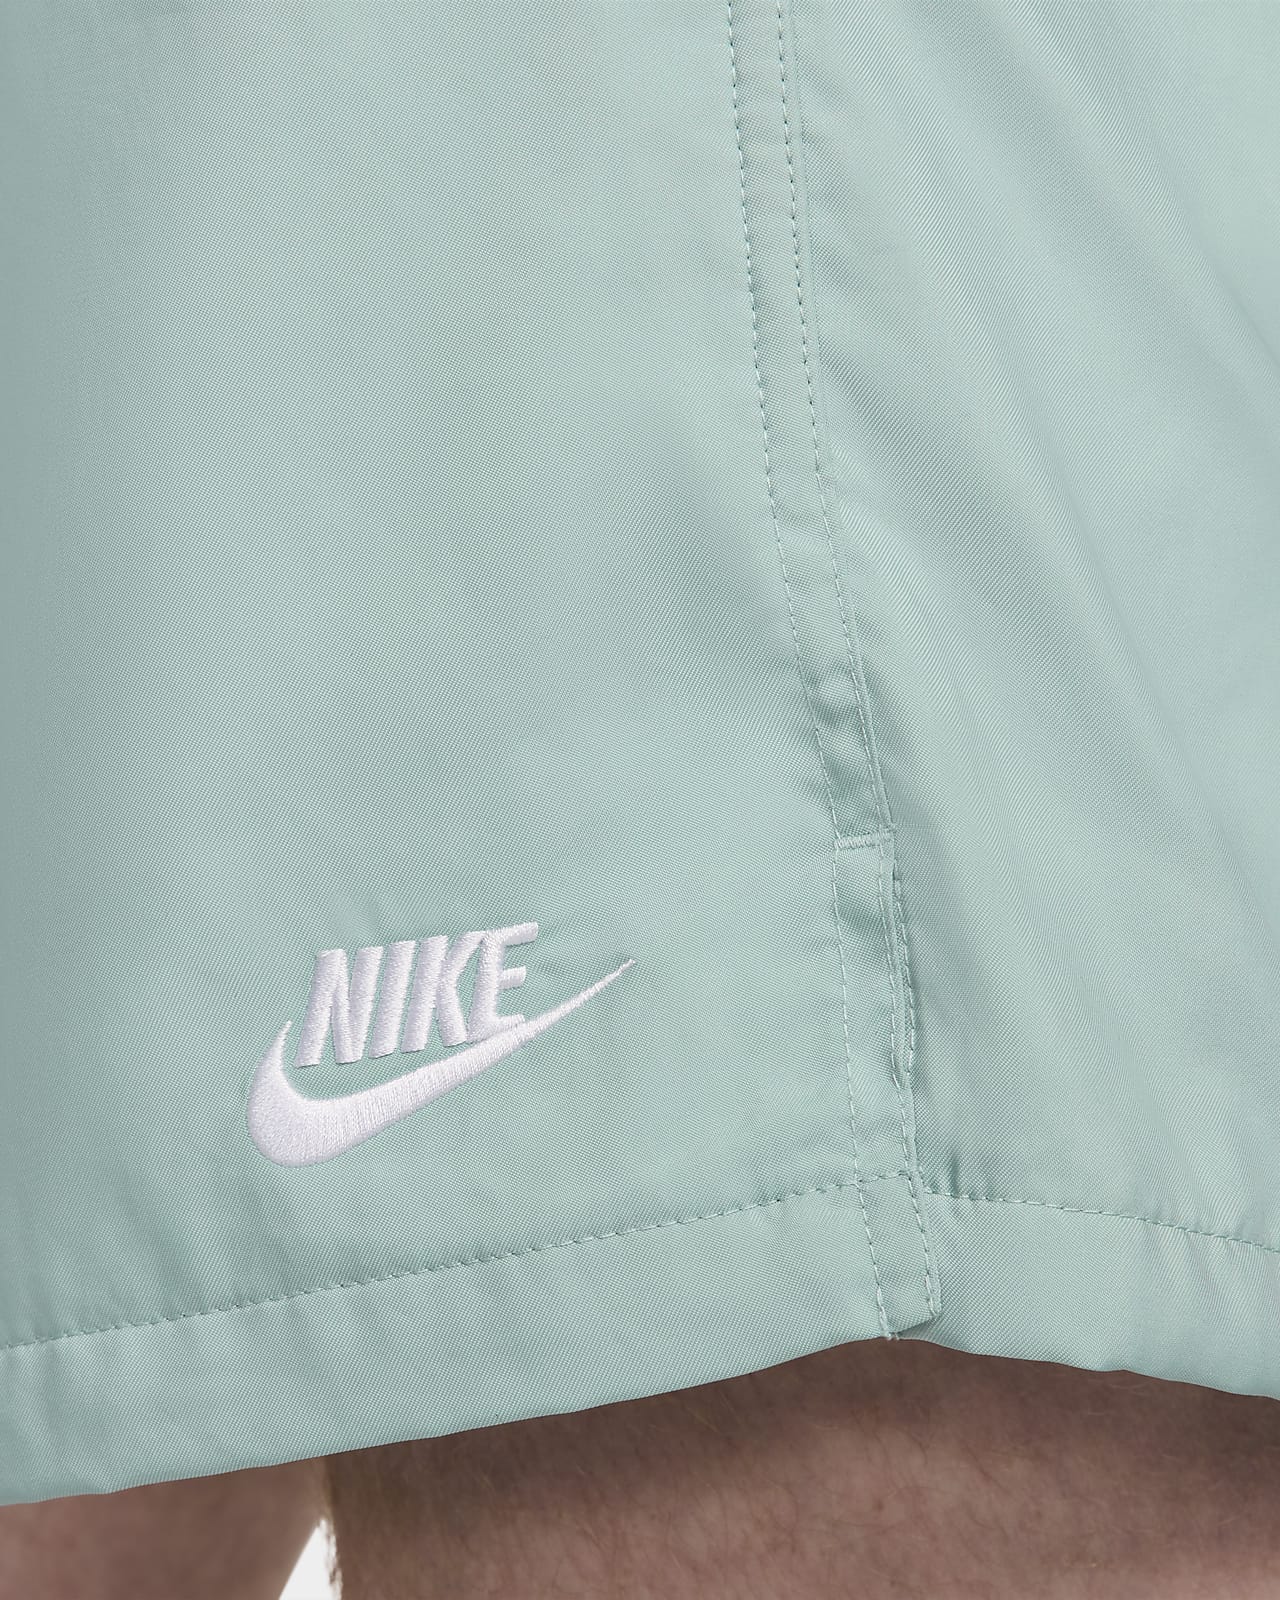 Nike Woven Lined Flow Shorts – DTLR